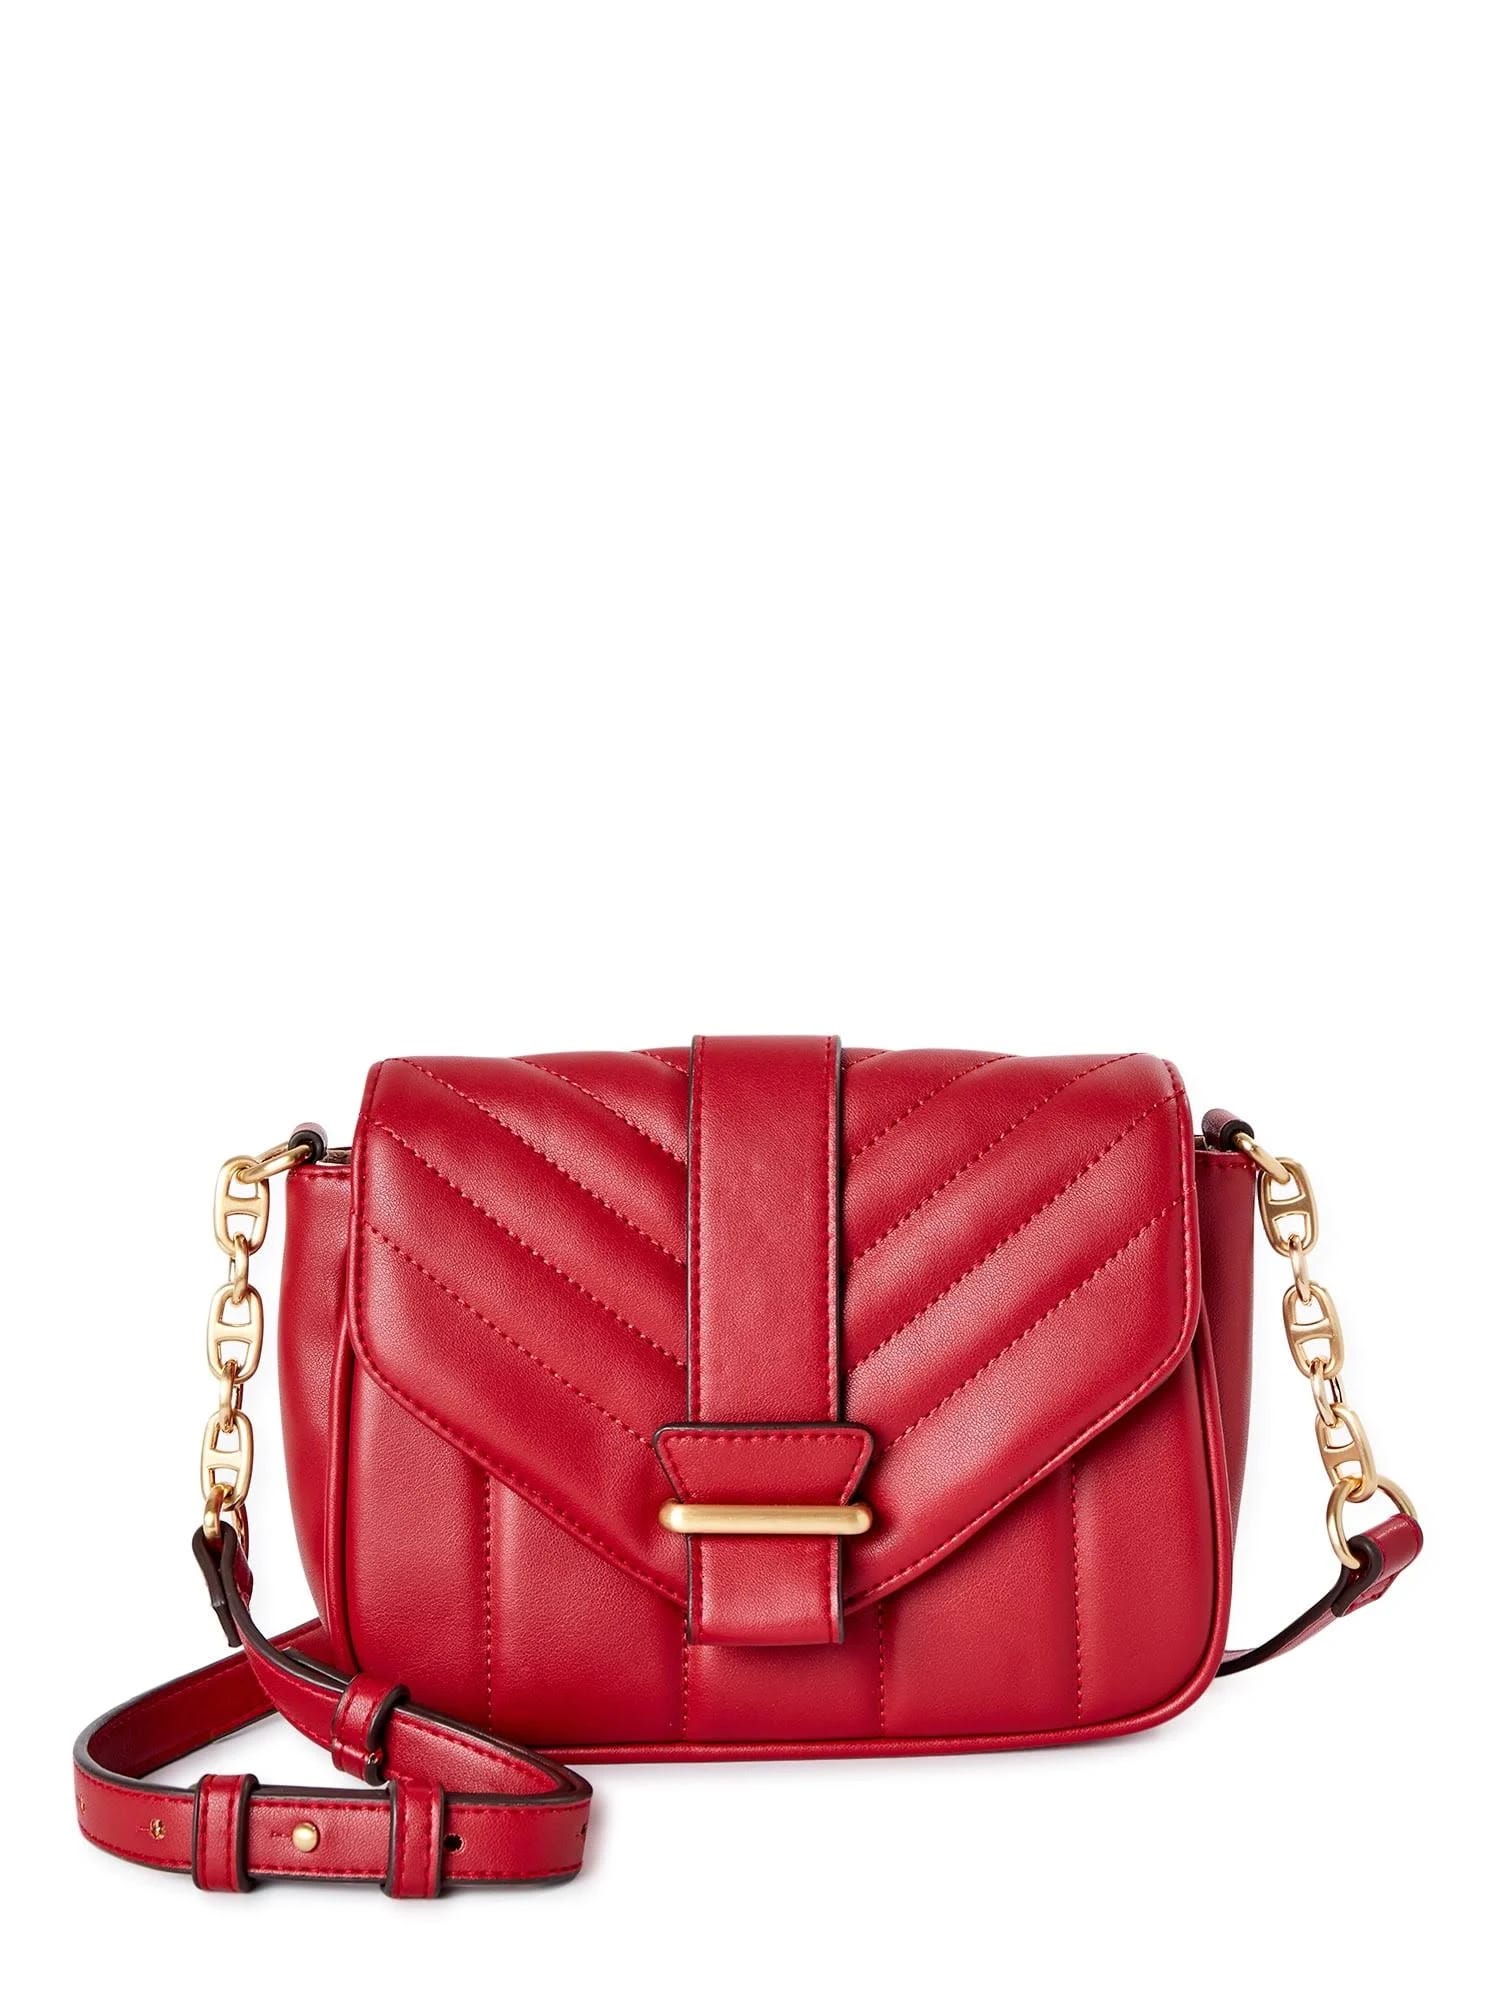 Vibrant Red Quilted Shoulder Bag for Everyday Use | Image